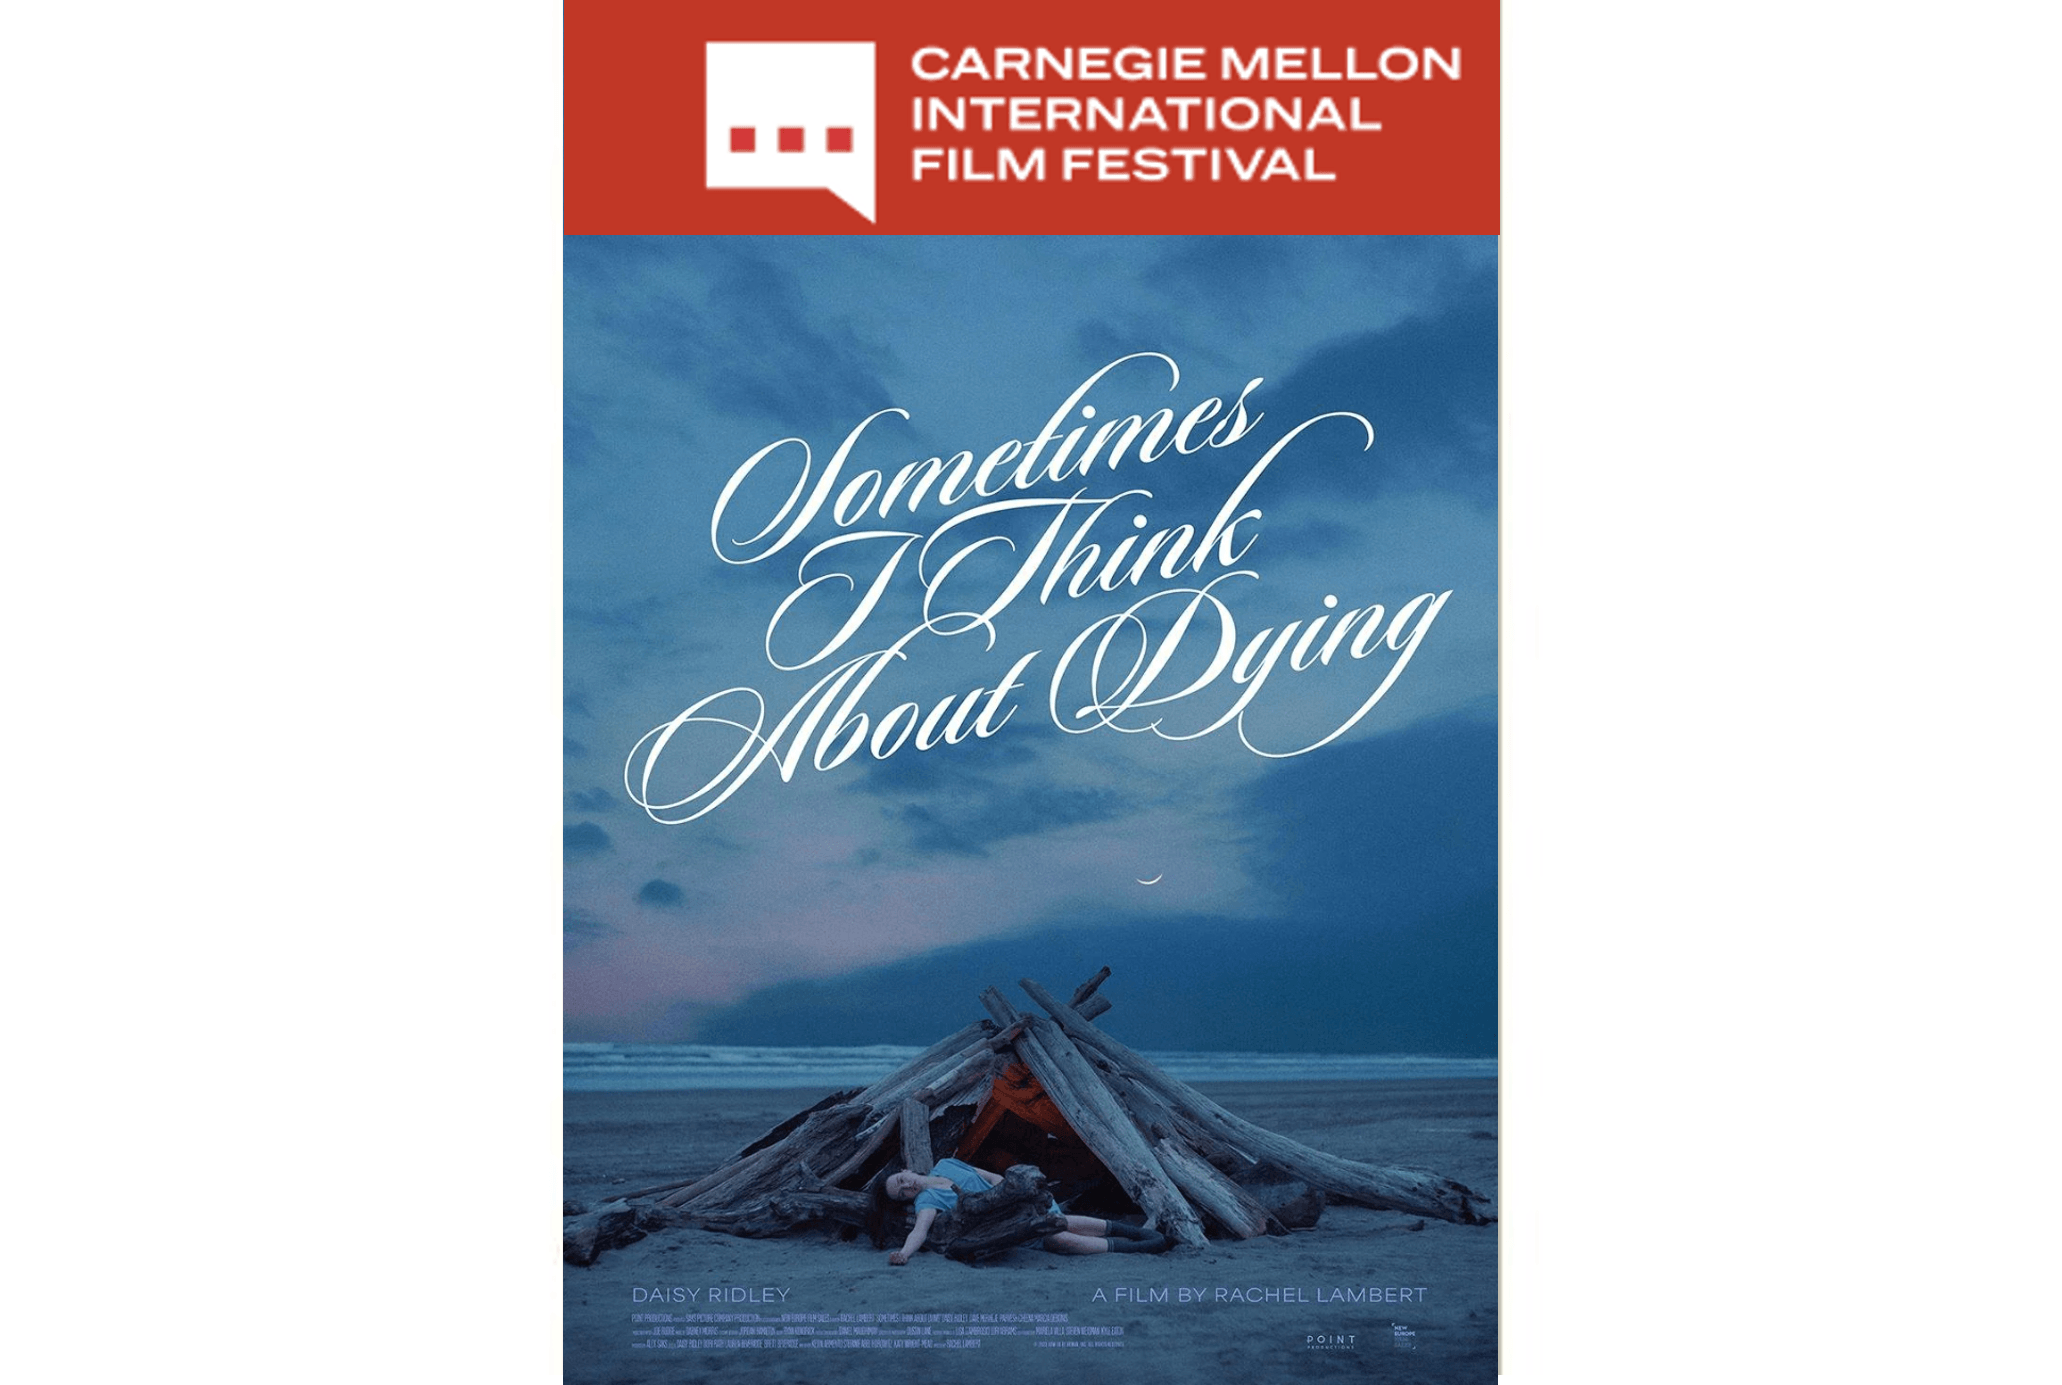 Sometimes I Think About Dying  — Carnegie Mellon International Film Festival